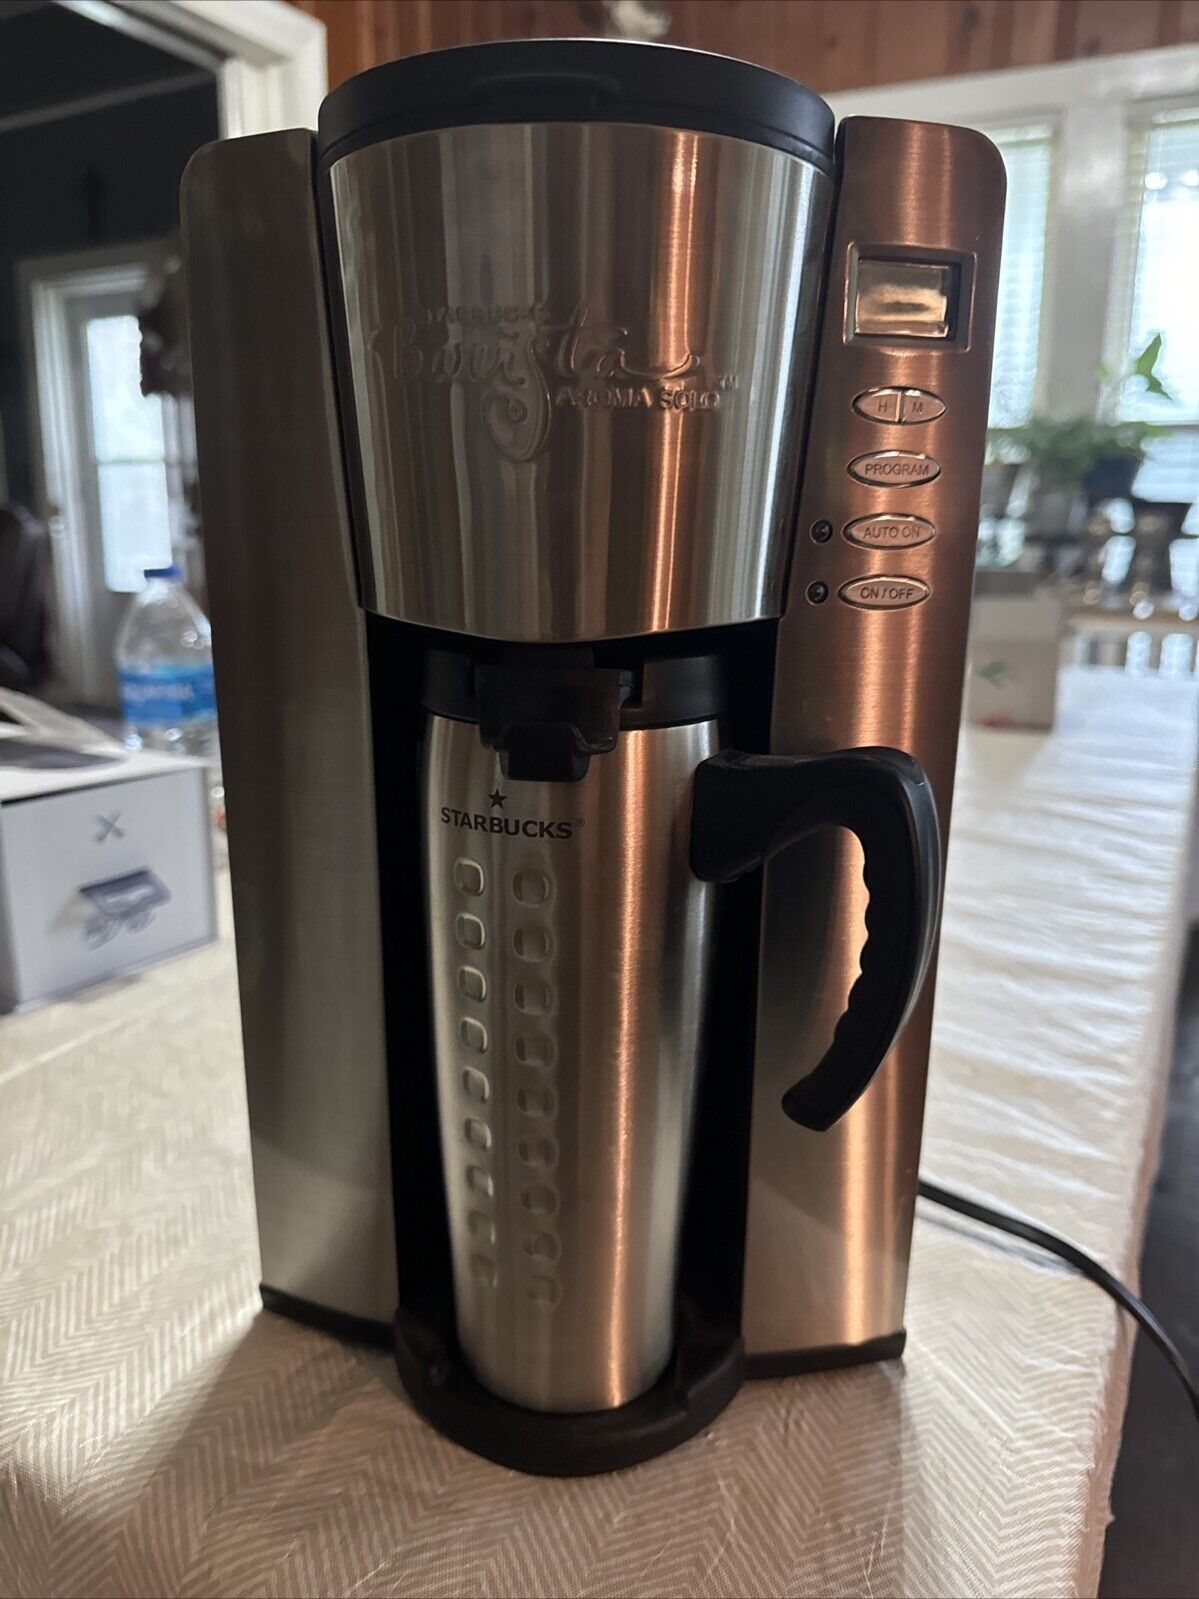 STARBUCKS BARISTA AROMA SOLO HOME COFFEE BREWER STAINLESS STEEL & TRAVEL TUMBLER